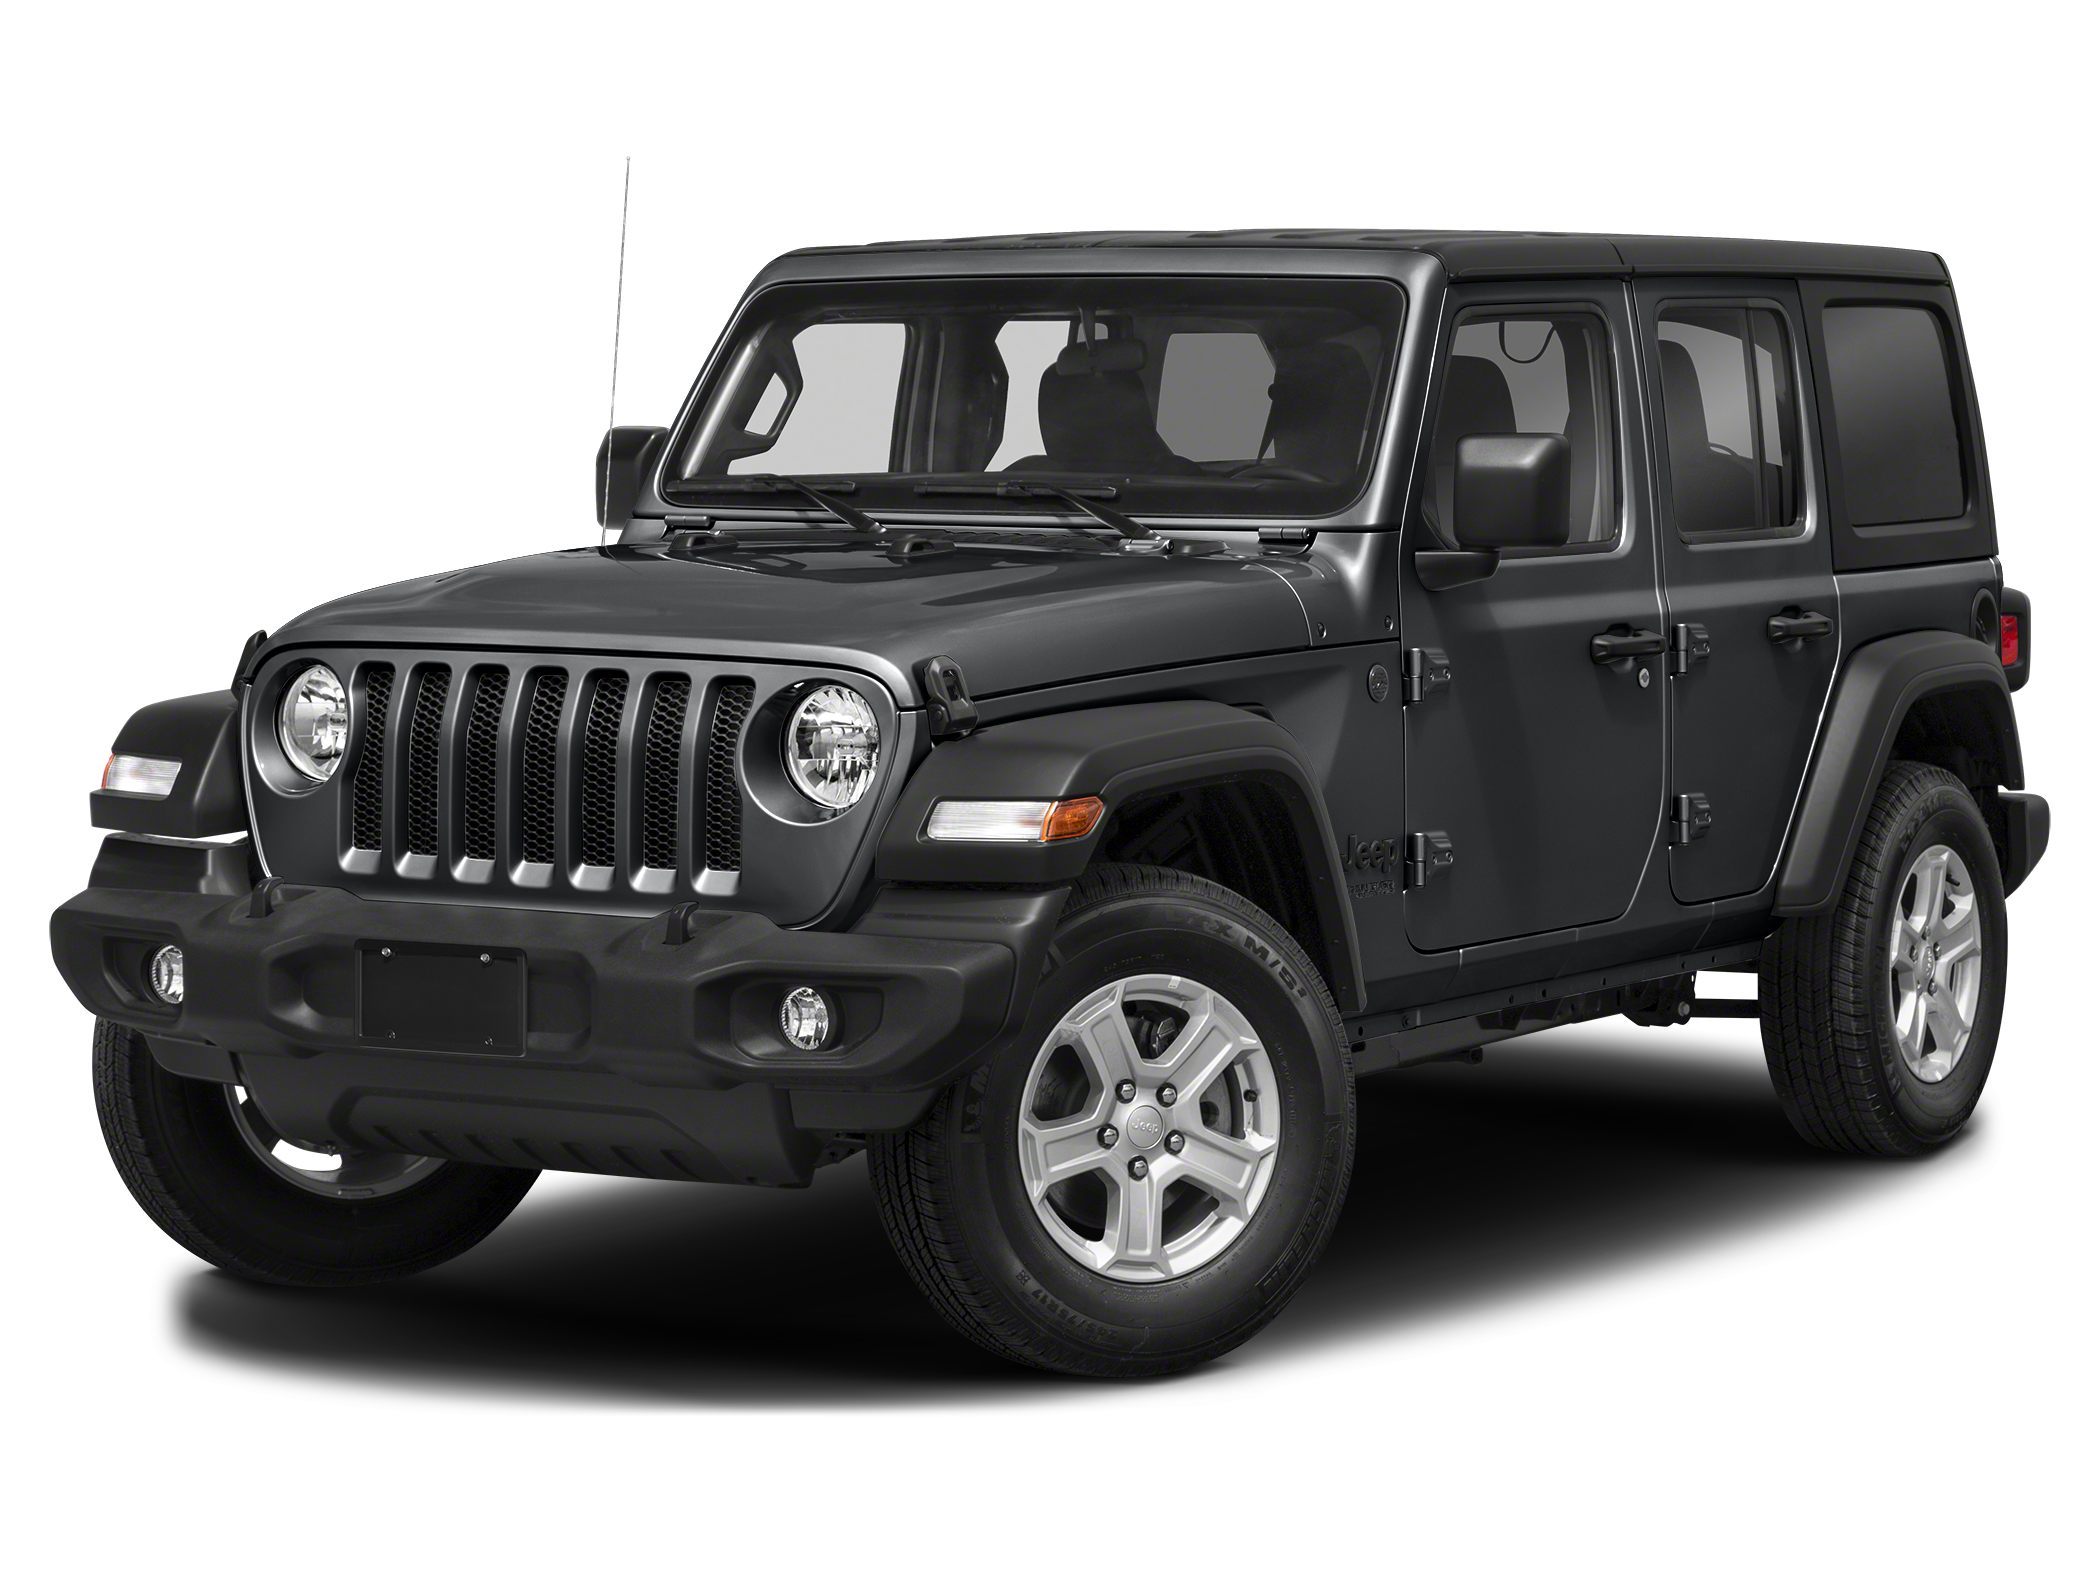 New 2023 Jeep Wrangler 4-DOOR SPORT ALTITUDE 4X4 For Sale in Bronx, NY |  Near Manhattan, Queens, & Westchester County, NY | VIN:1C4HJXDG3PW564393